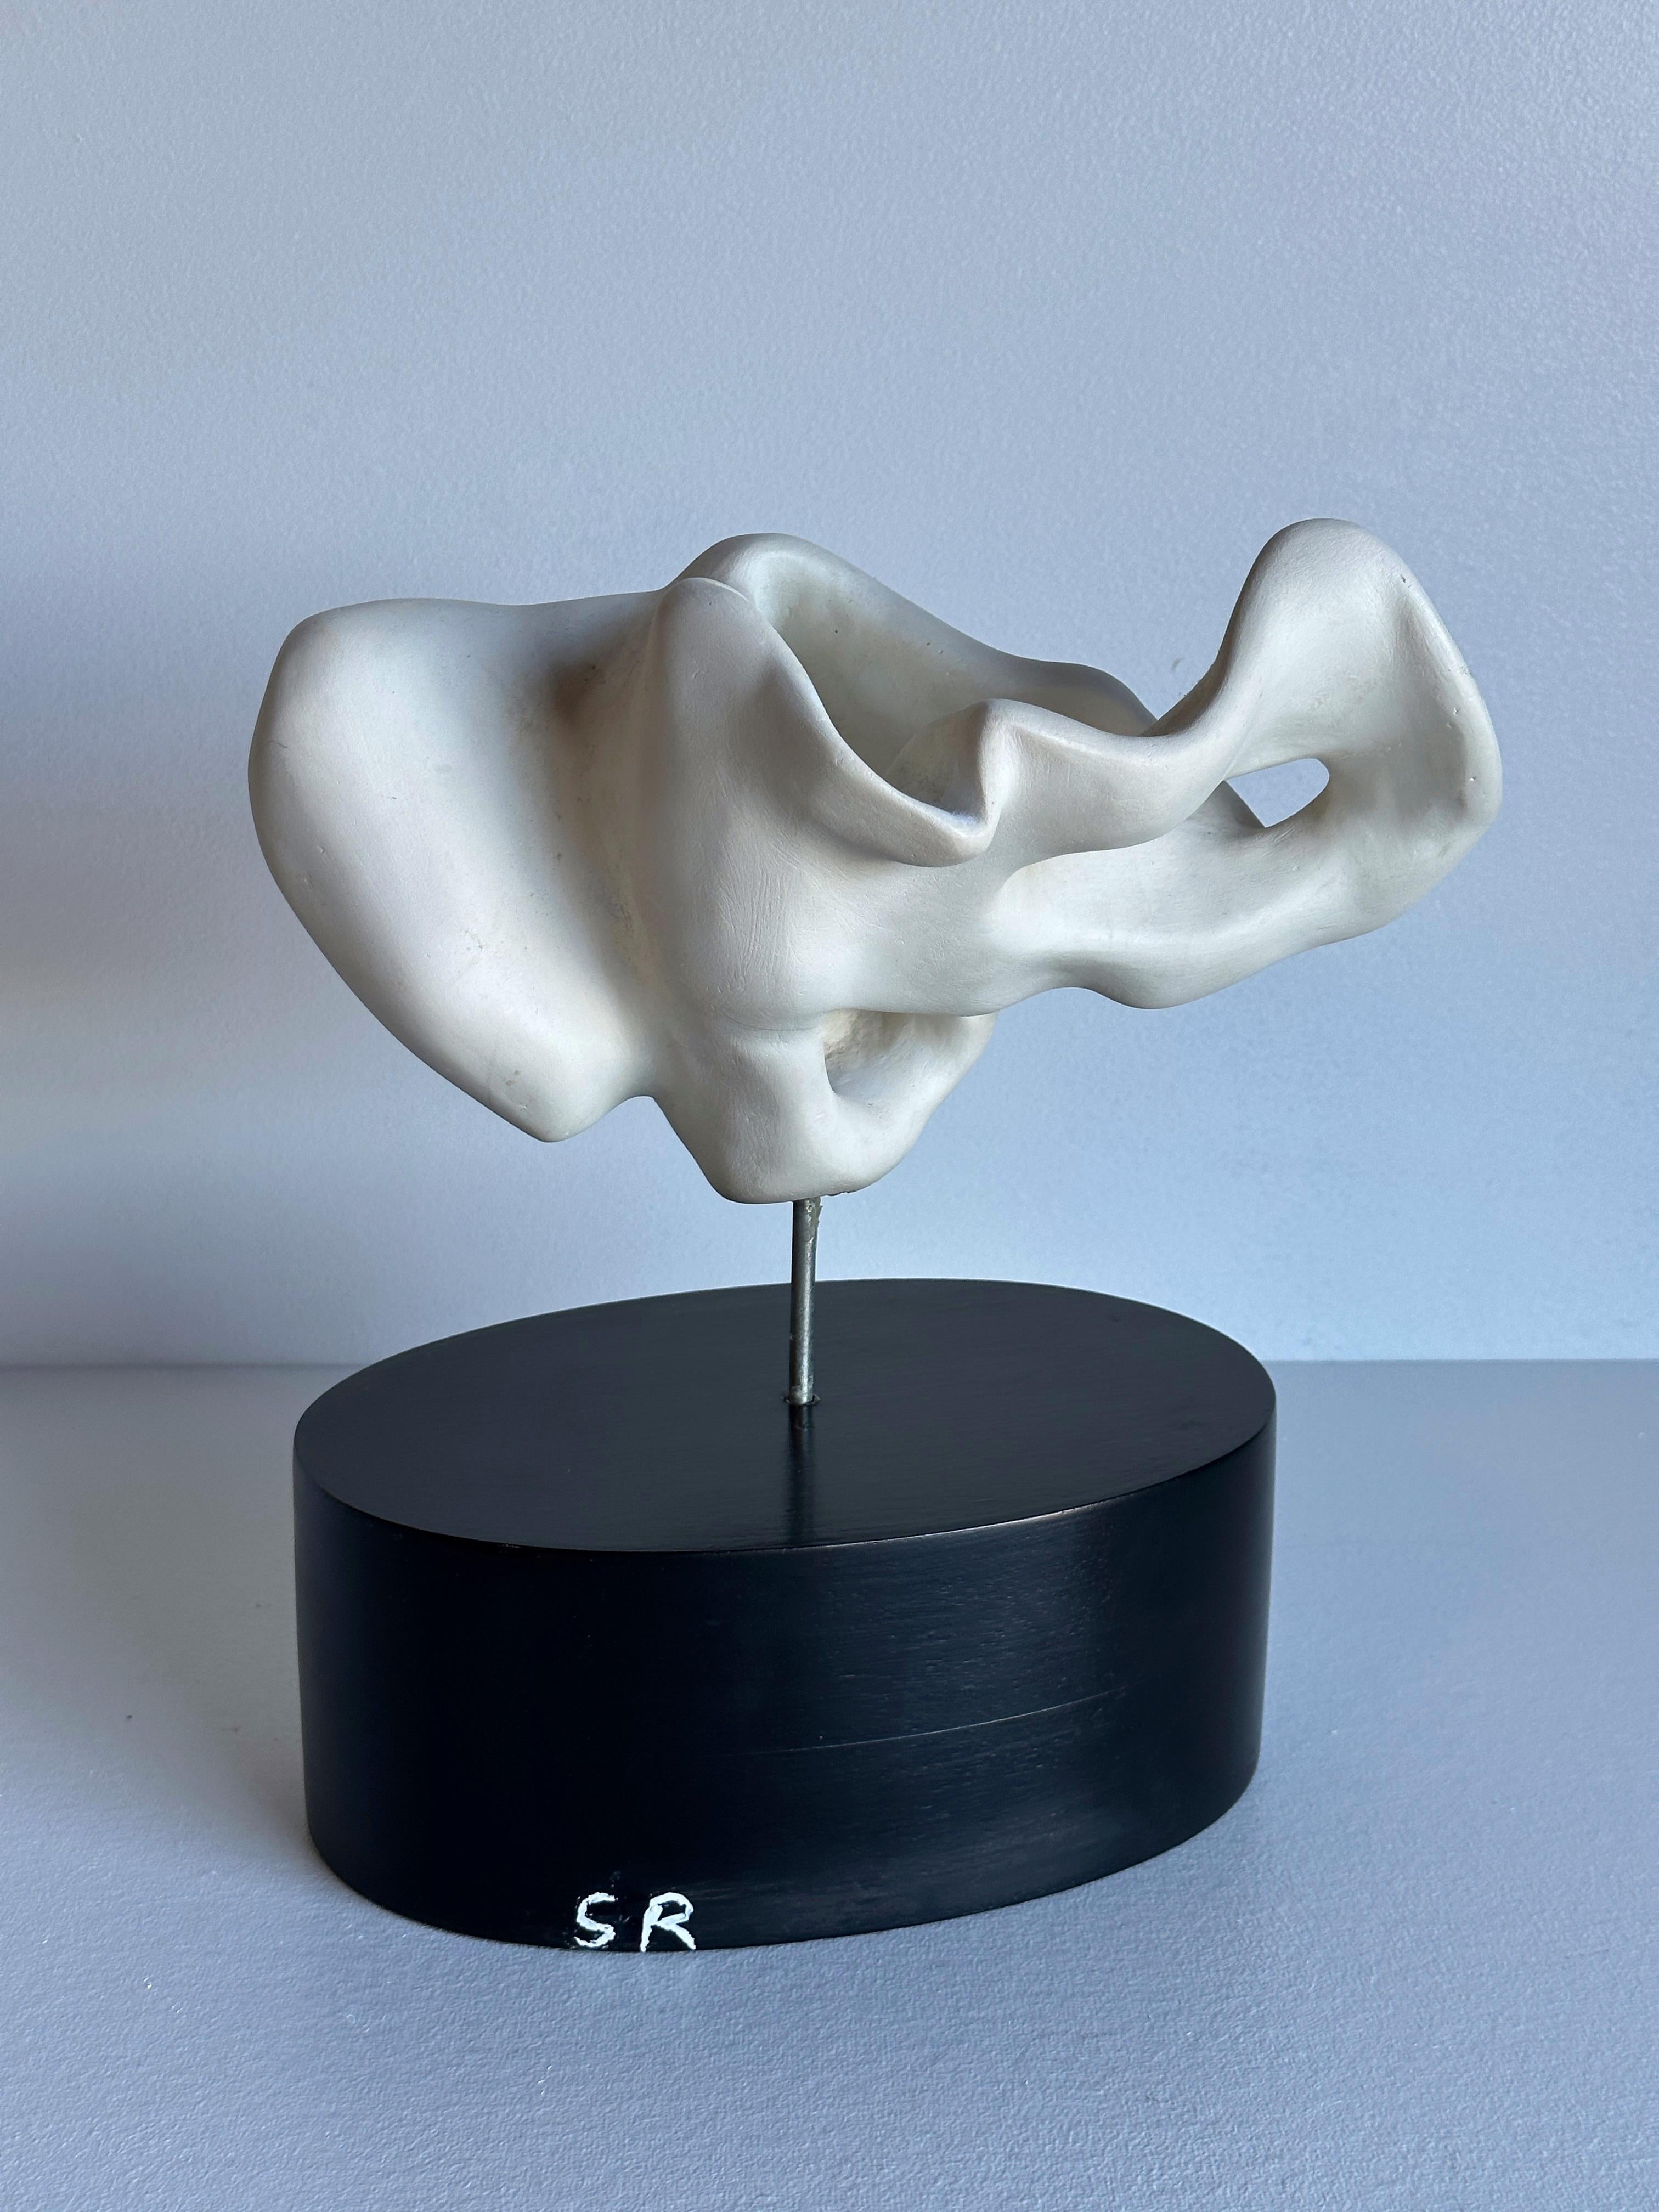 White Plaster Biomorphic Tabletop Sculpture Mounted on Black Wood Stand, signed SR. Artist unknown. 